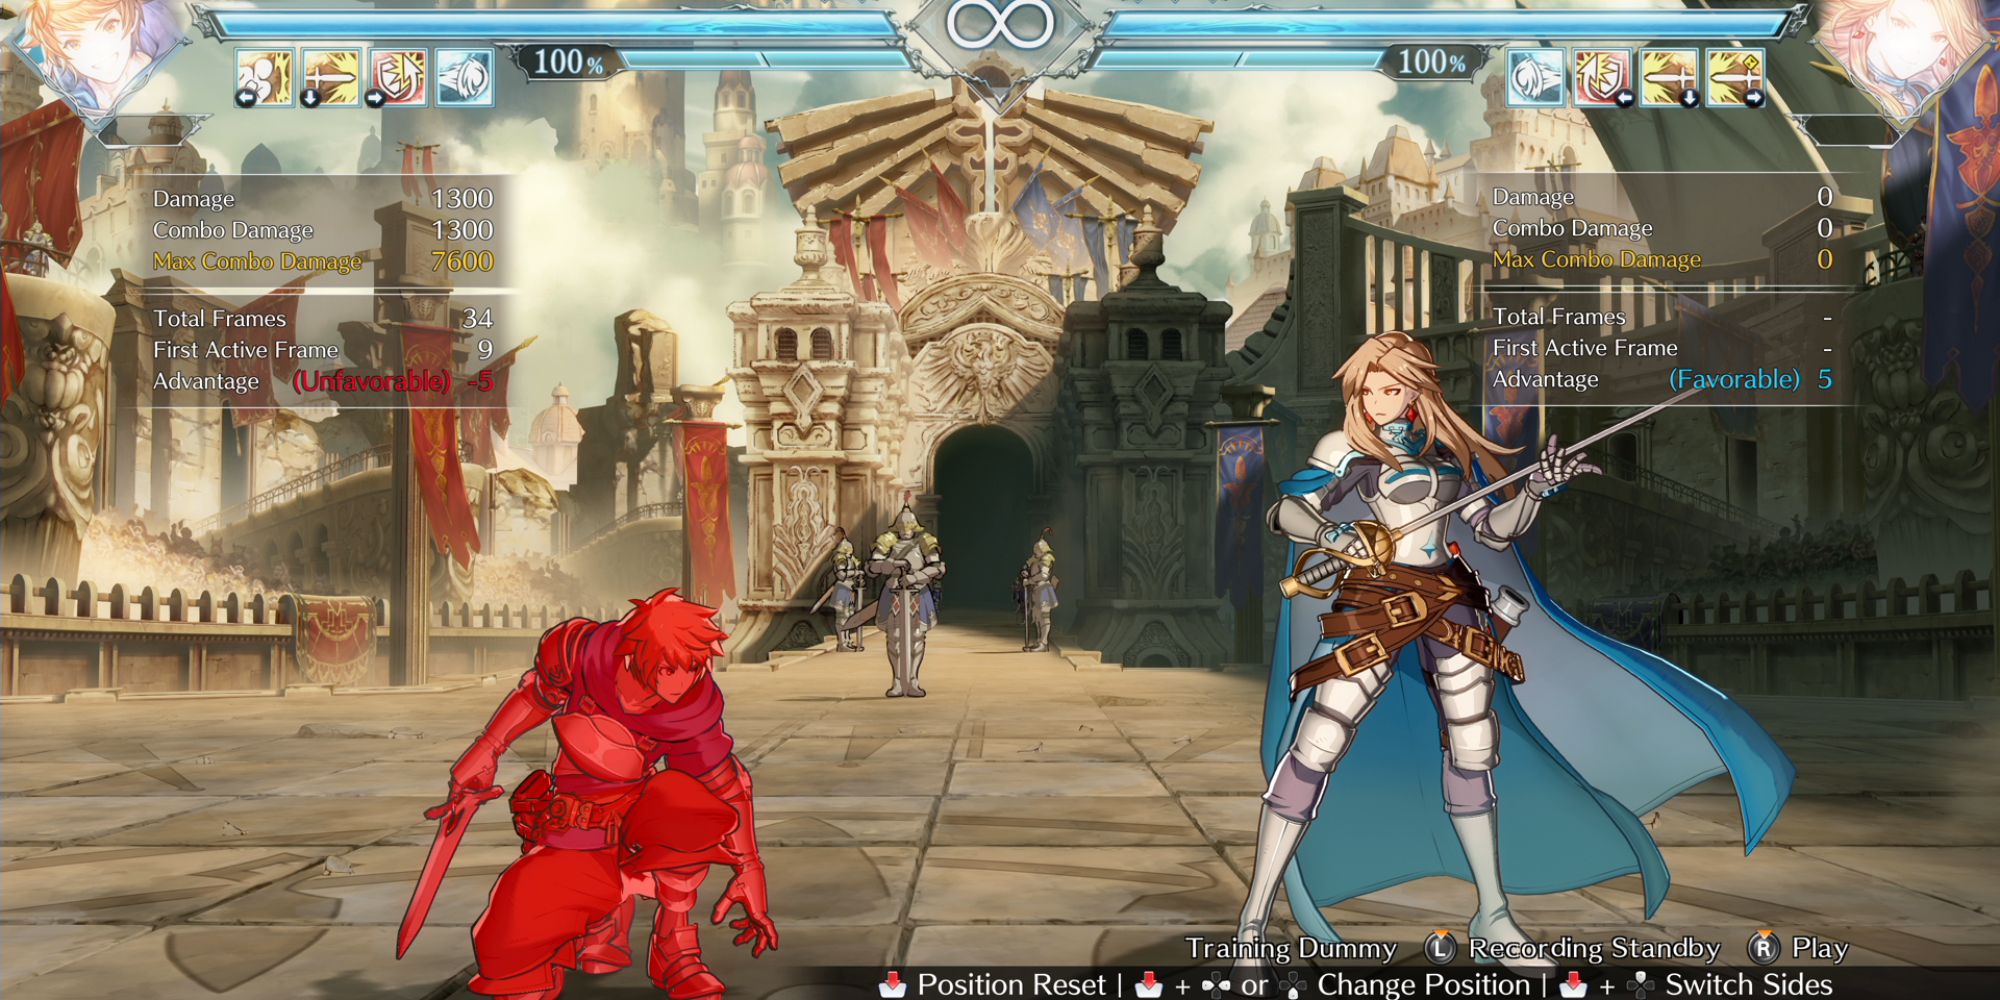 Training mode showing damage counts and Katalina taunted a kneeling and red Gran